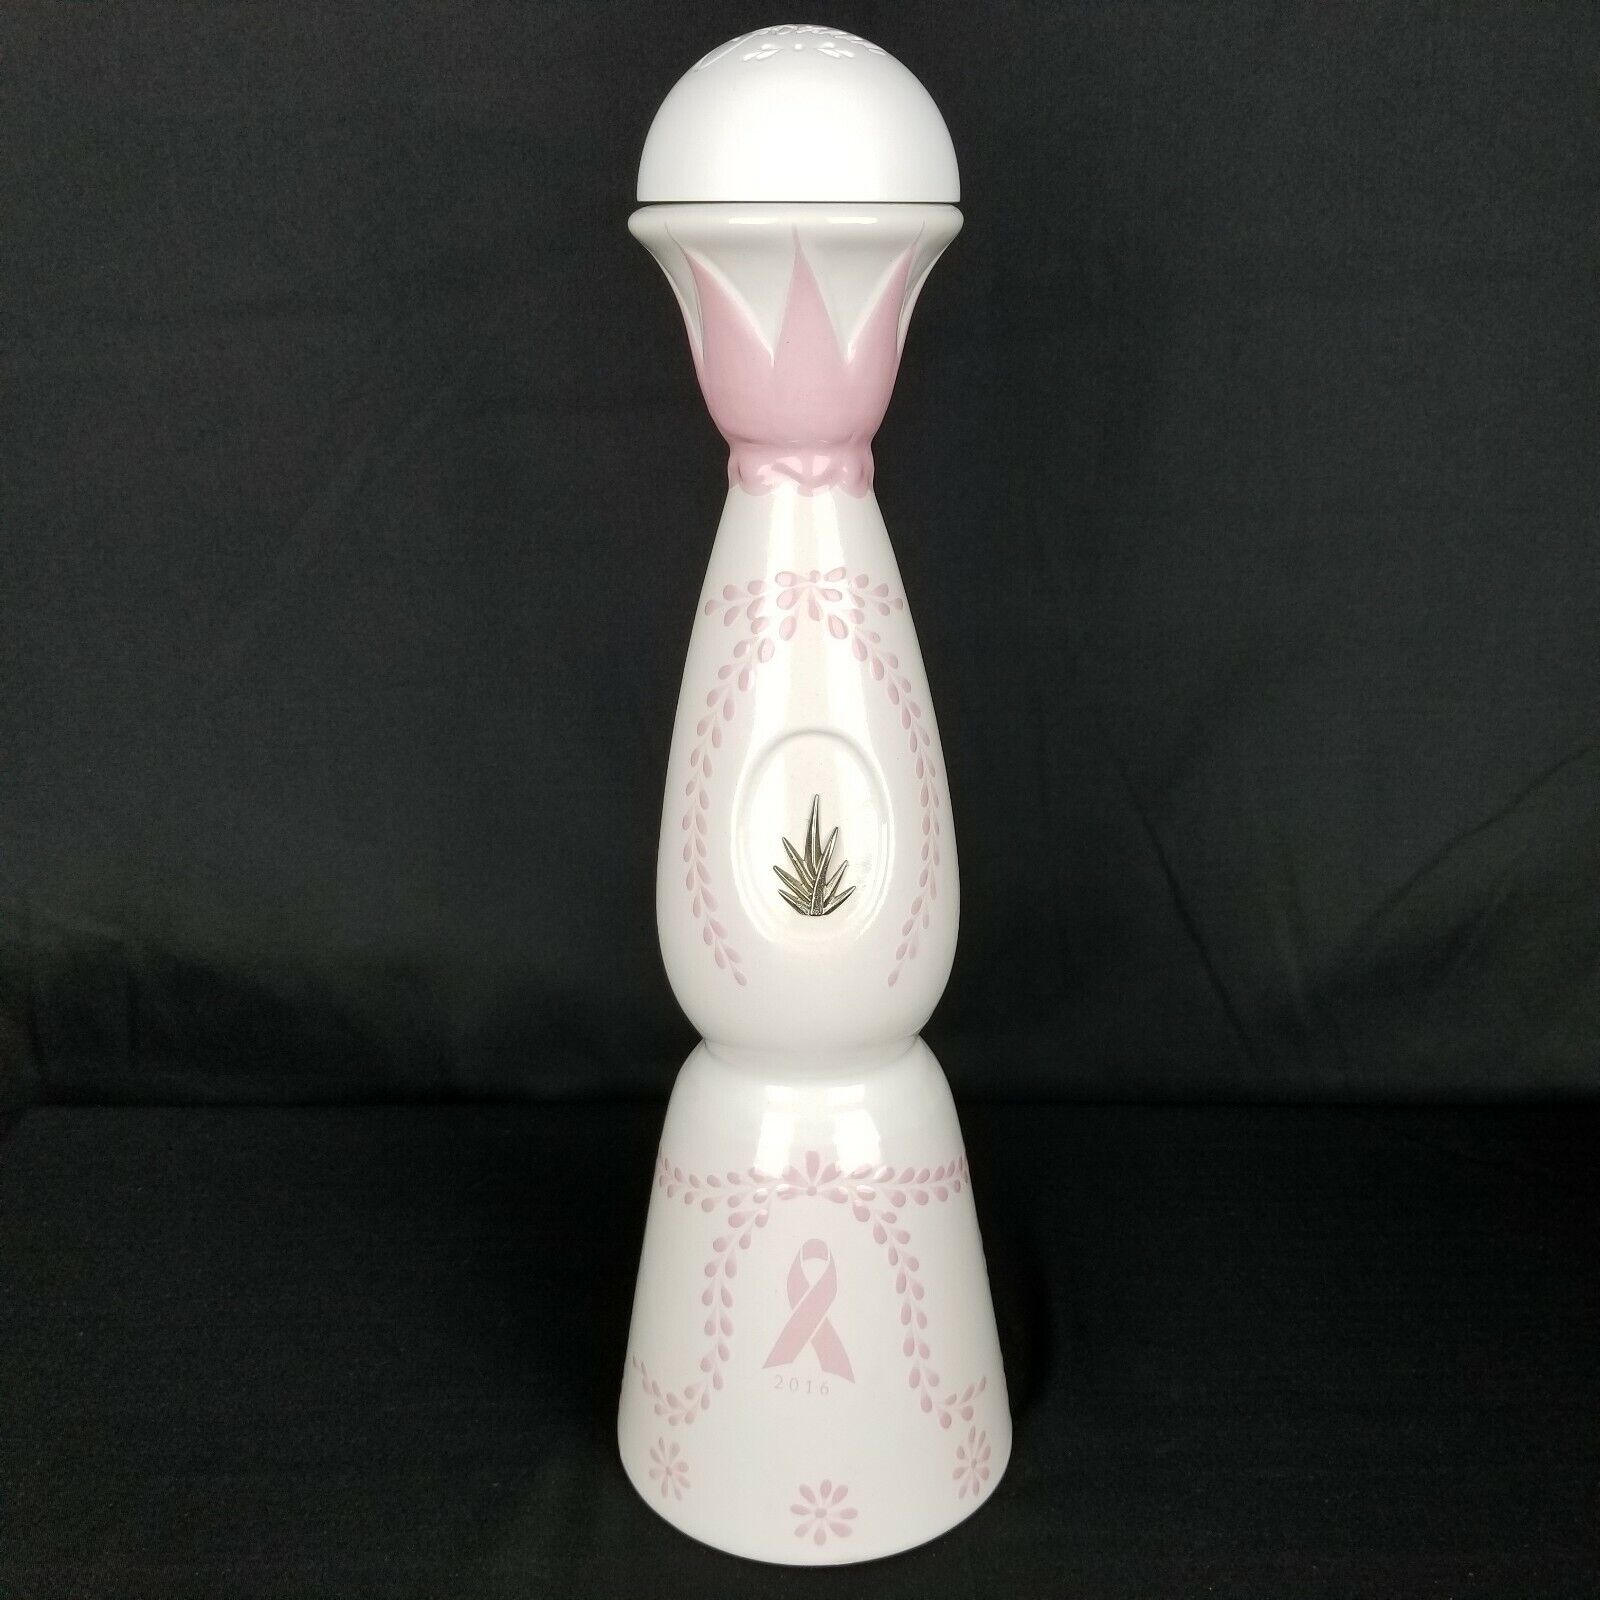 Clase Azul Tequila Breast Cancer Awareness 2016 EMPTY BOTTLE Limited Edition 